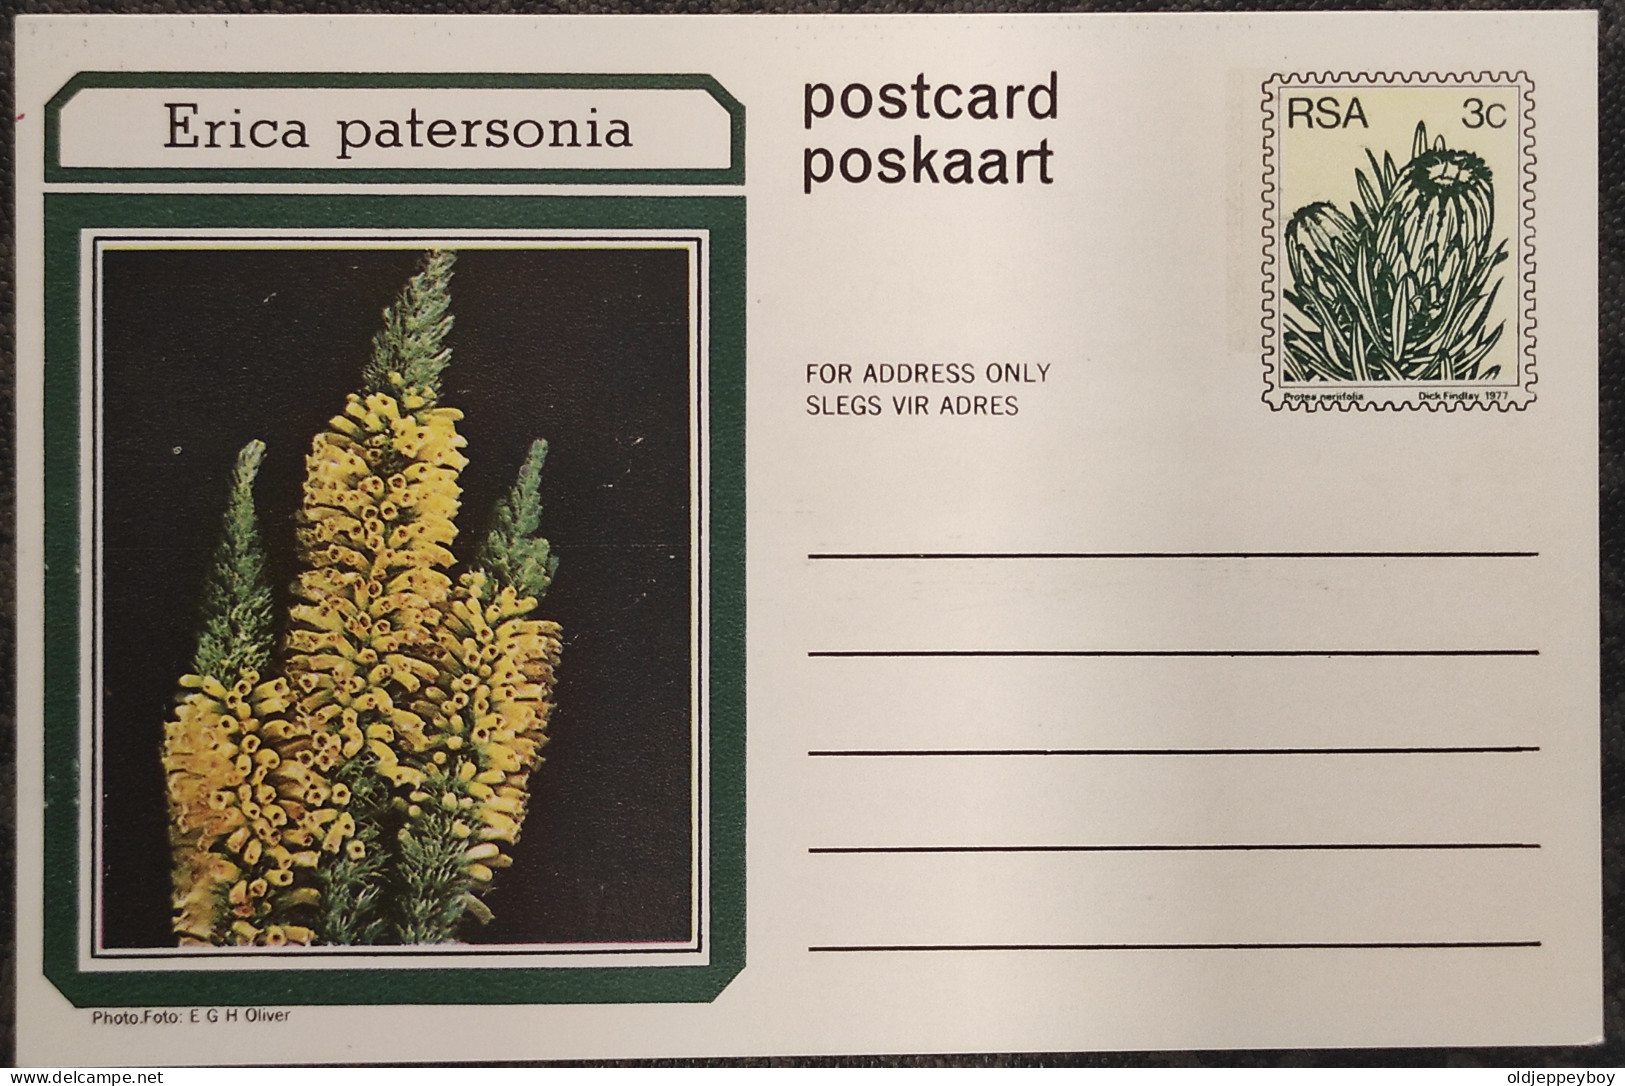 3c SOUTH AFRICA Postal STATIONERY CARD Illus ERICA PATERSONIA FLOWER Cover Stamps Flowers Rsa - Covers & Documents